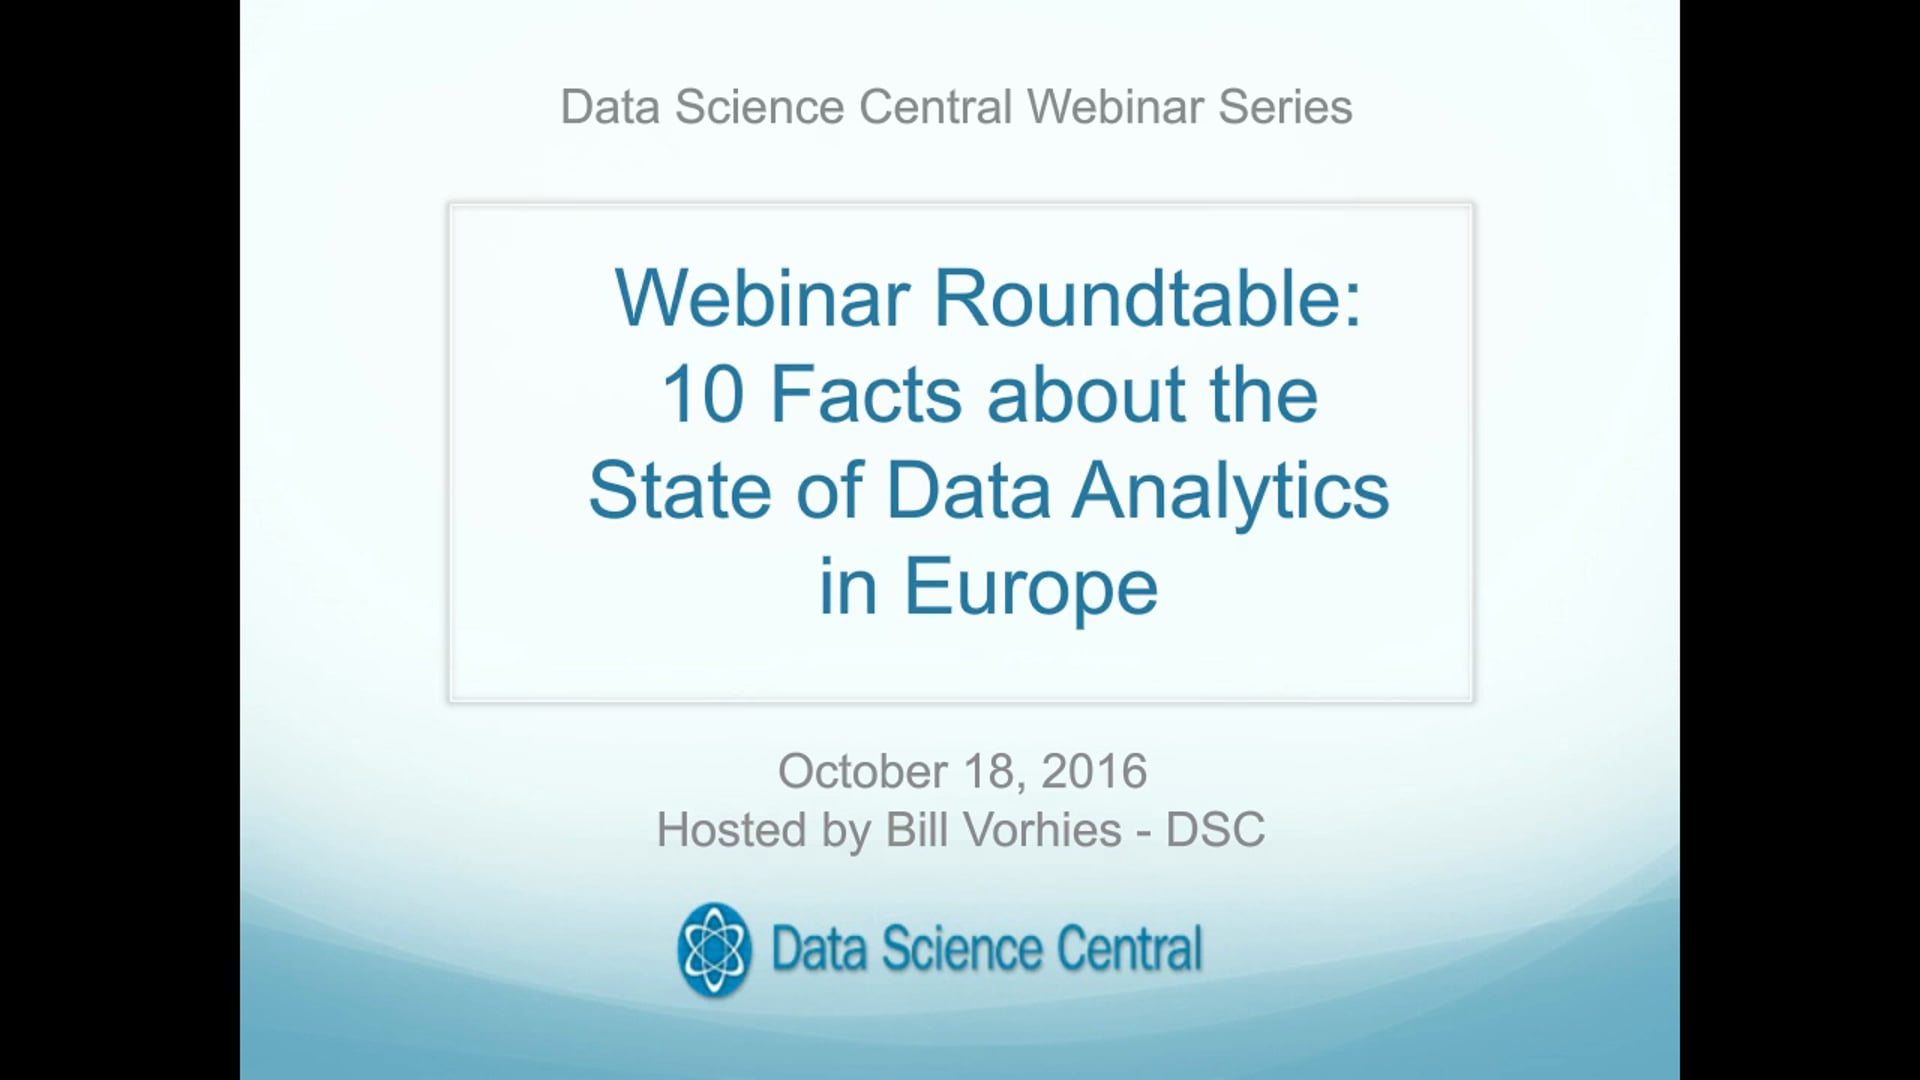 DSC Webinar Series: Open Roundtable: 10 Facts about the State of Data Analytics in Europe – Vimeo thumbnail